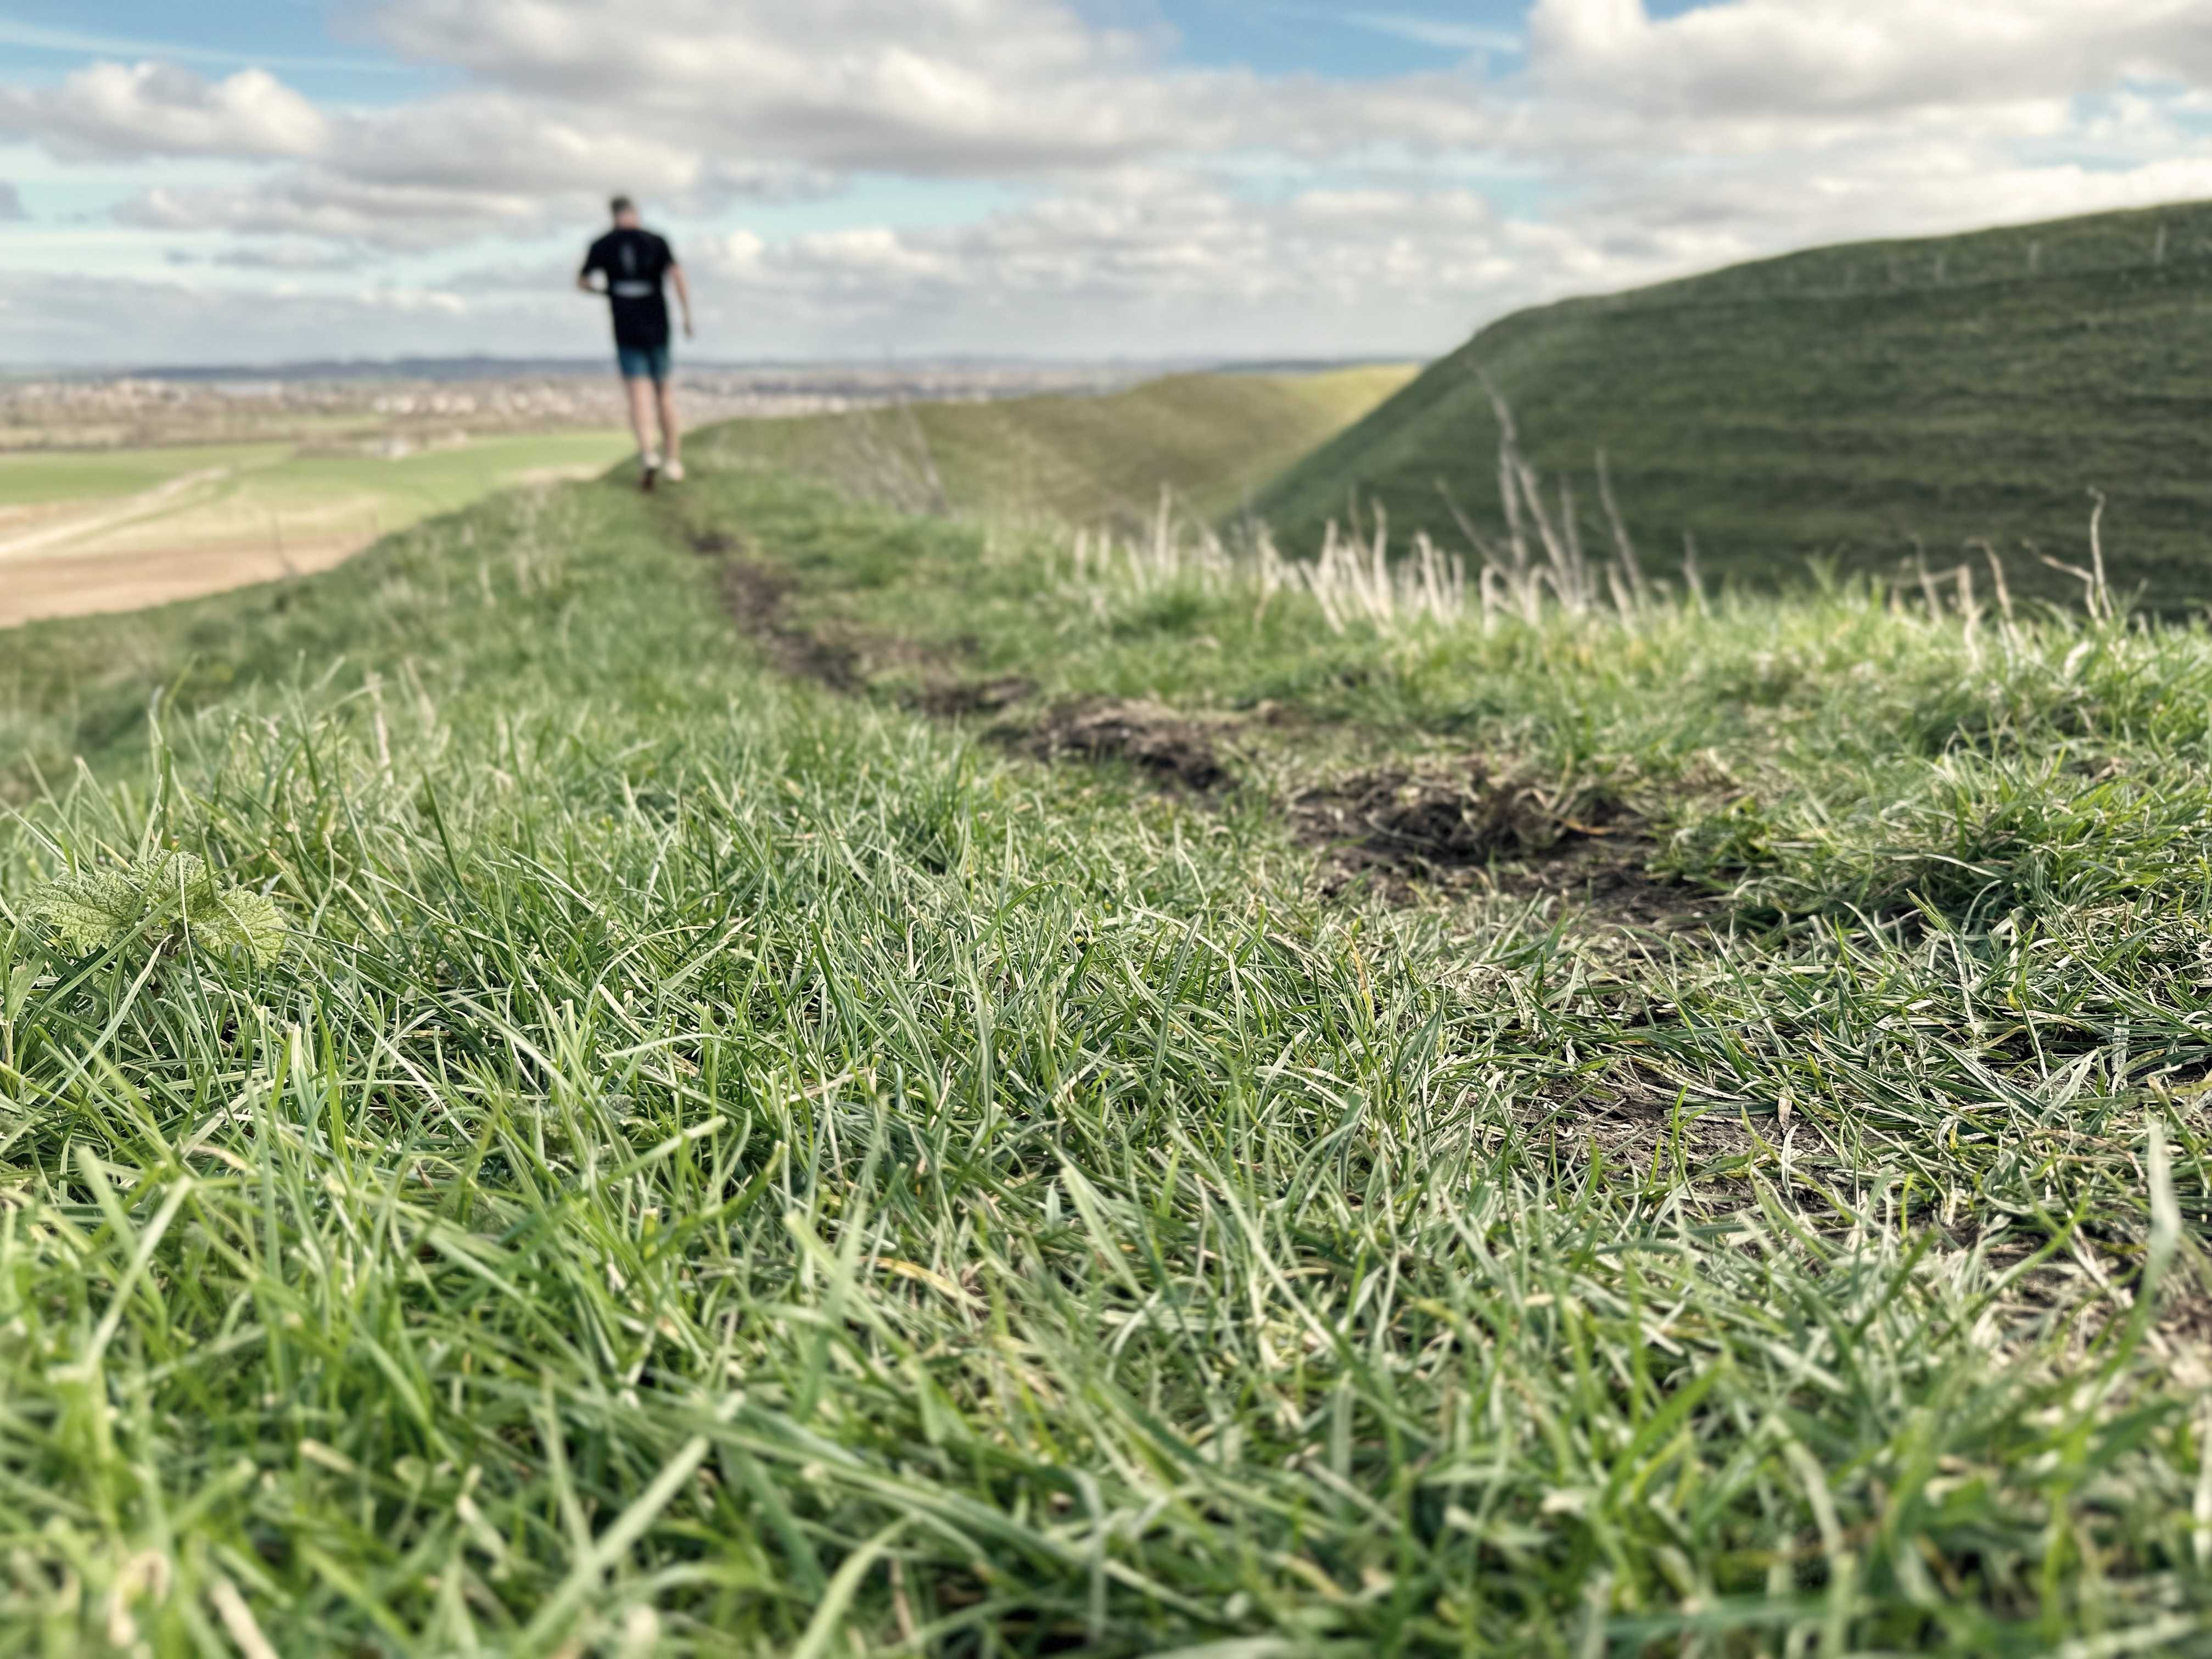 Trail running Stu stumbles into the distance on the ramparts of maiden castle in dorset!